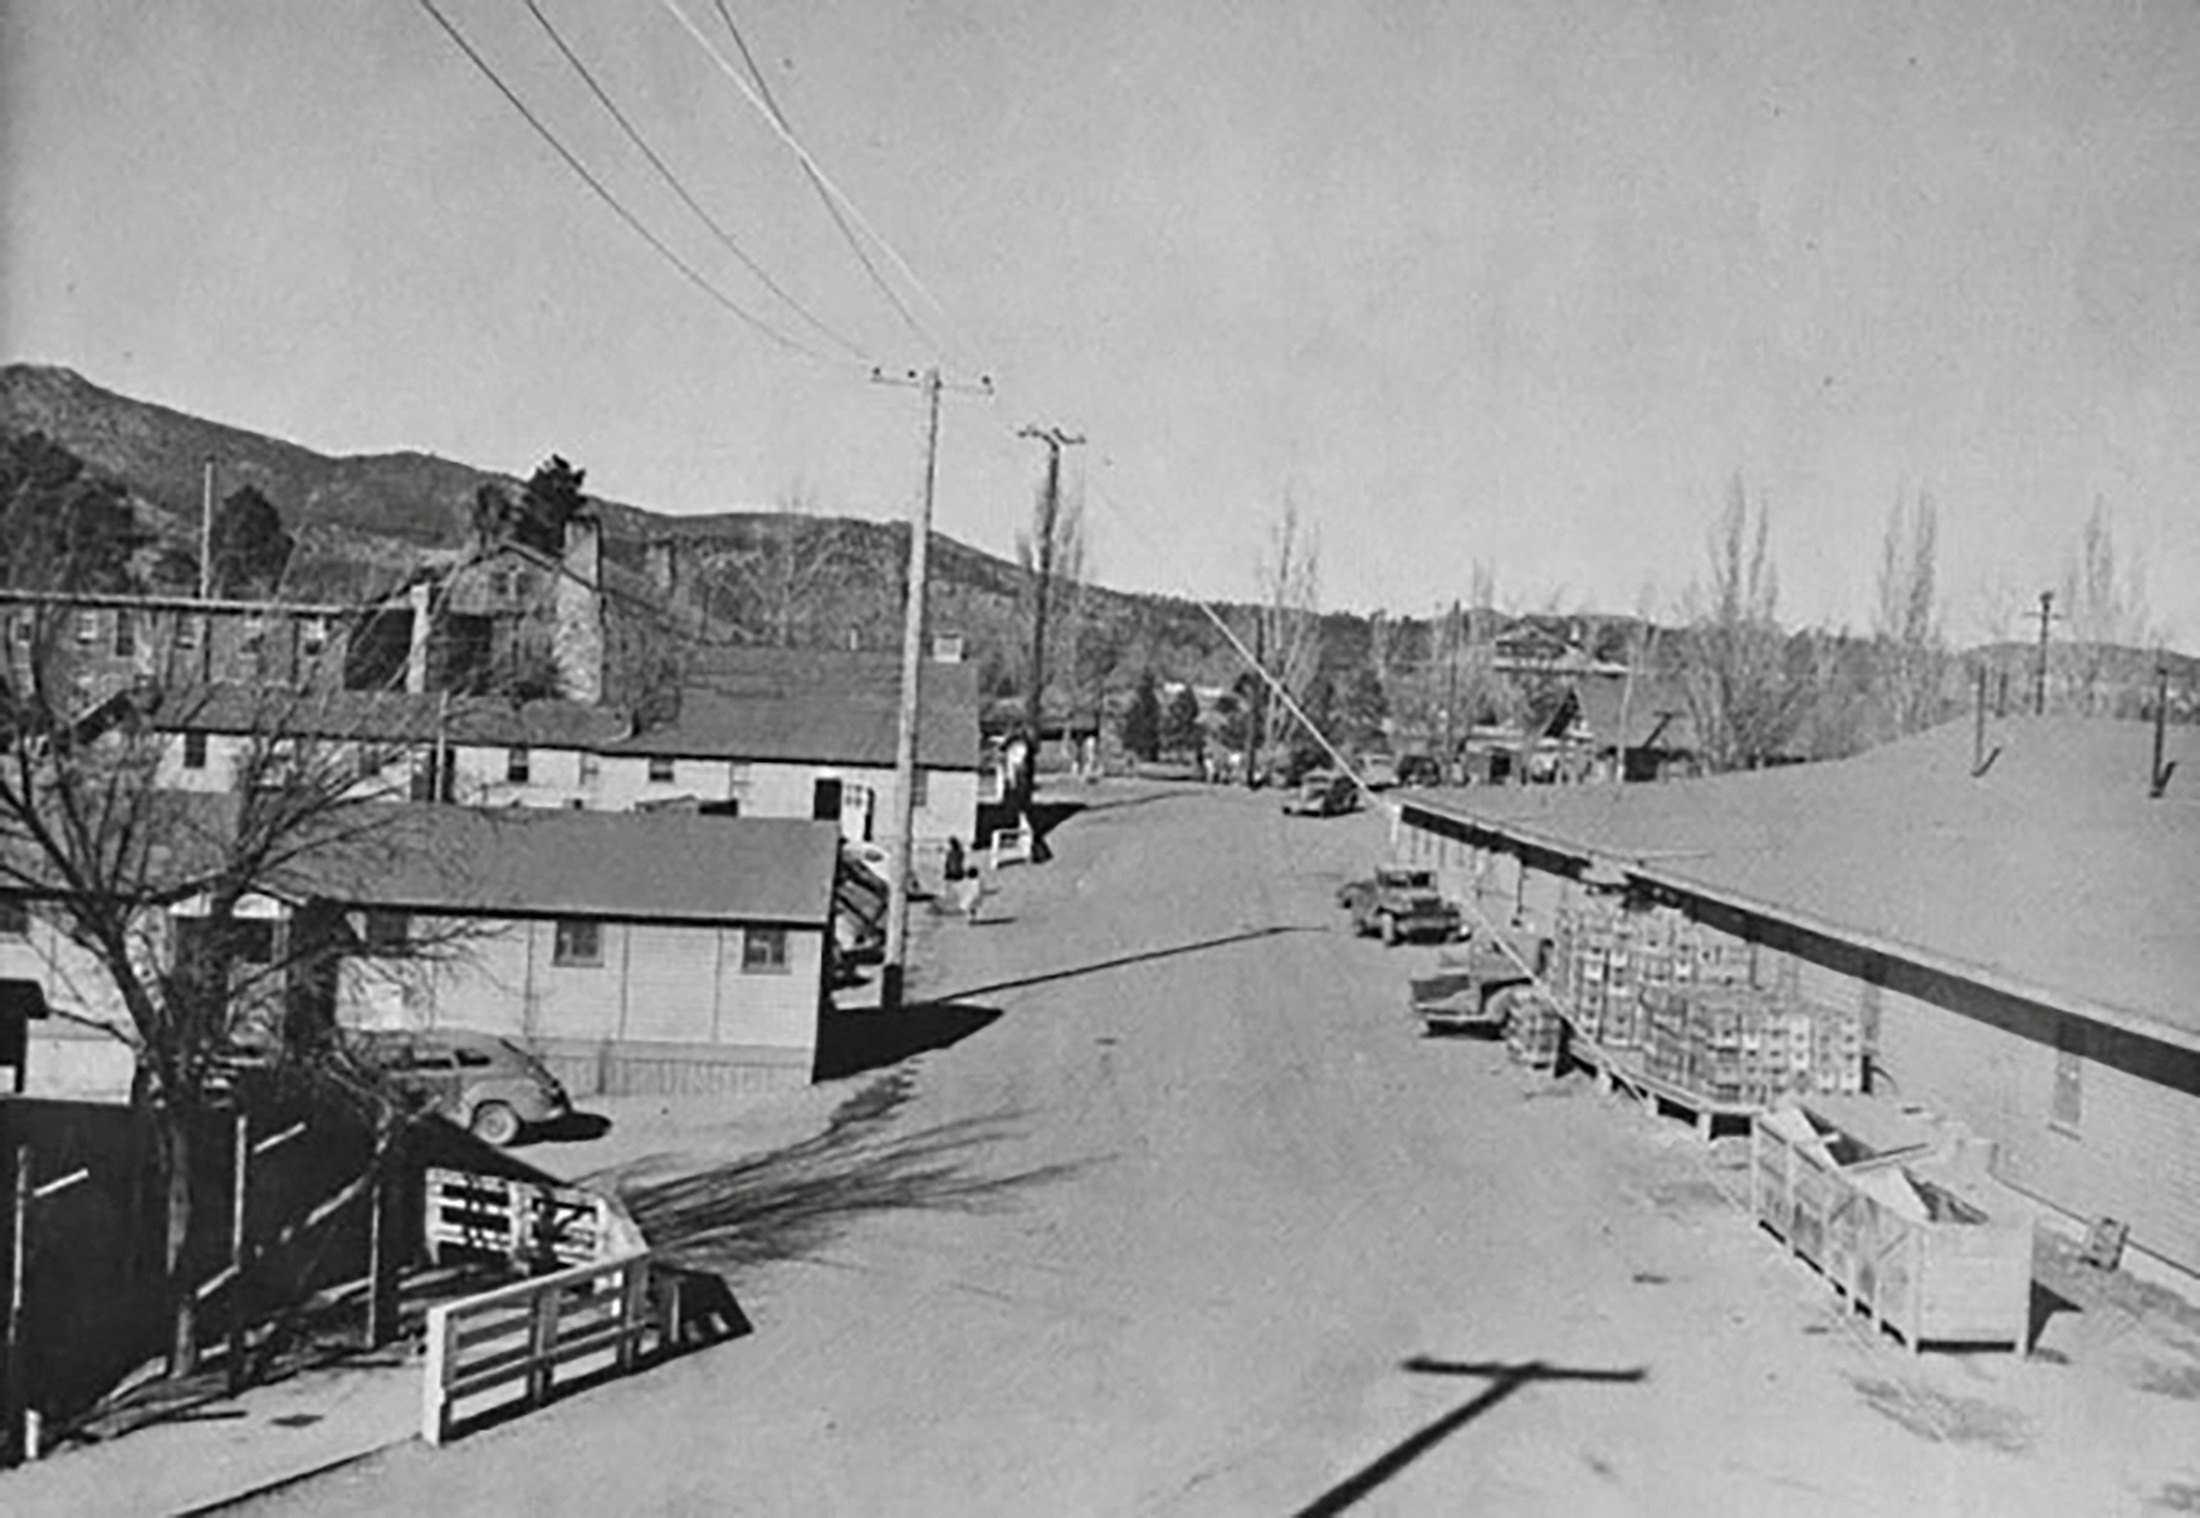 The town of Los Alamos, New Mexico with Fuller Lodge and the "Big House" dormitories is seen in an undated photograph. Department of Energy/Handout via REUTERS. THIS IMAGE HAS BEEN SUPPLIED BY A THIRD PARTY. - RC29C2A06ME3